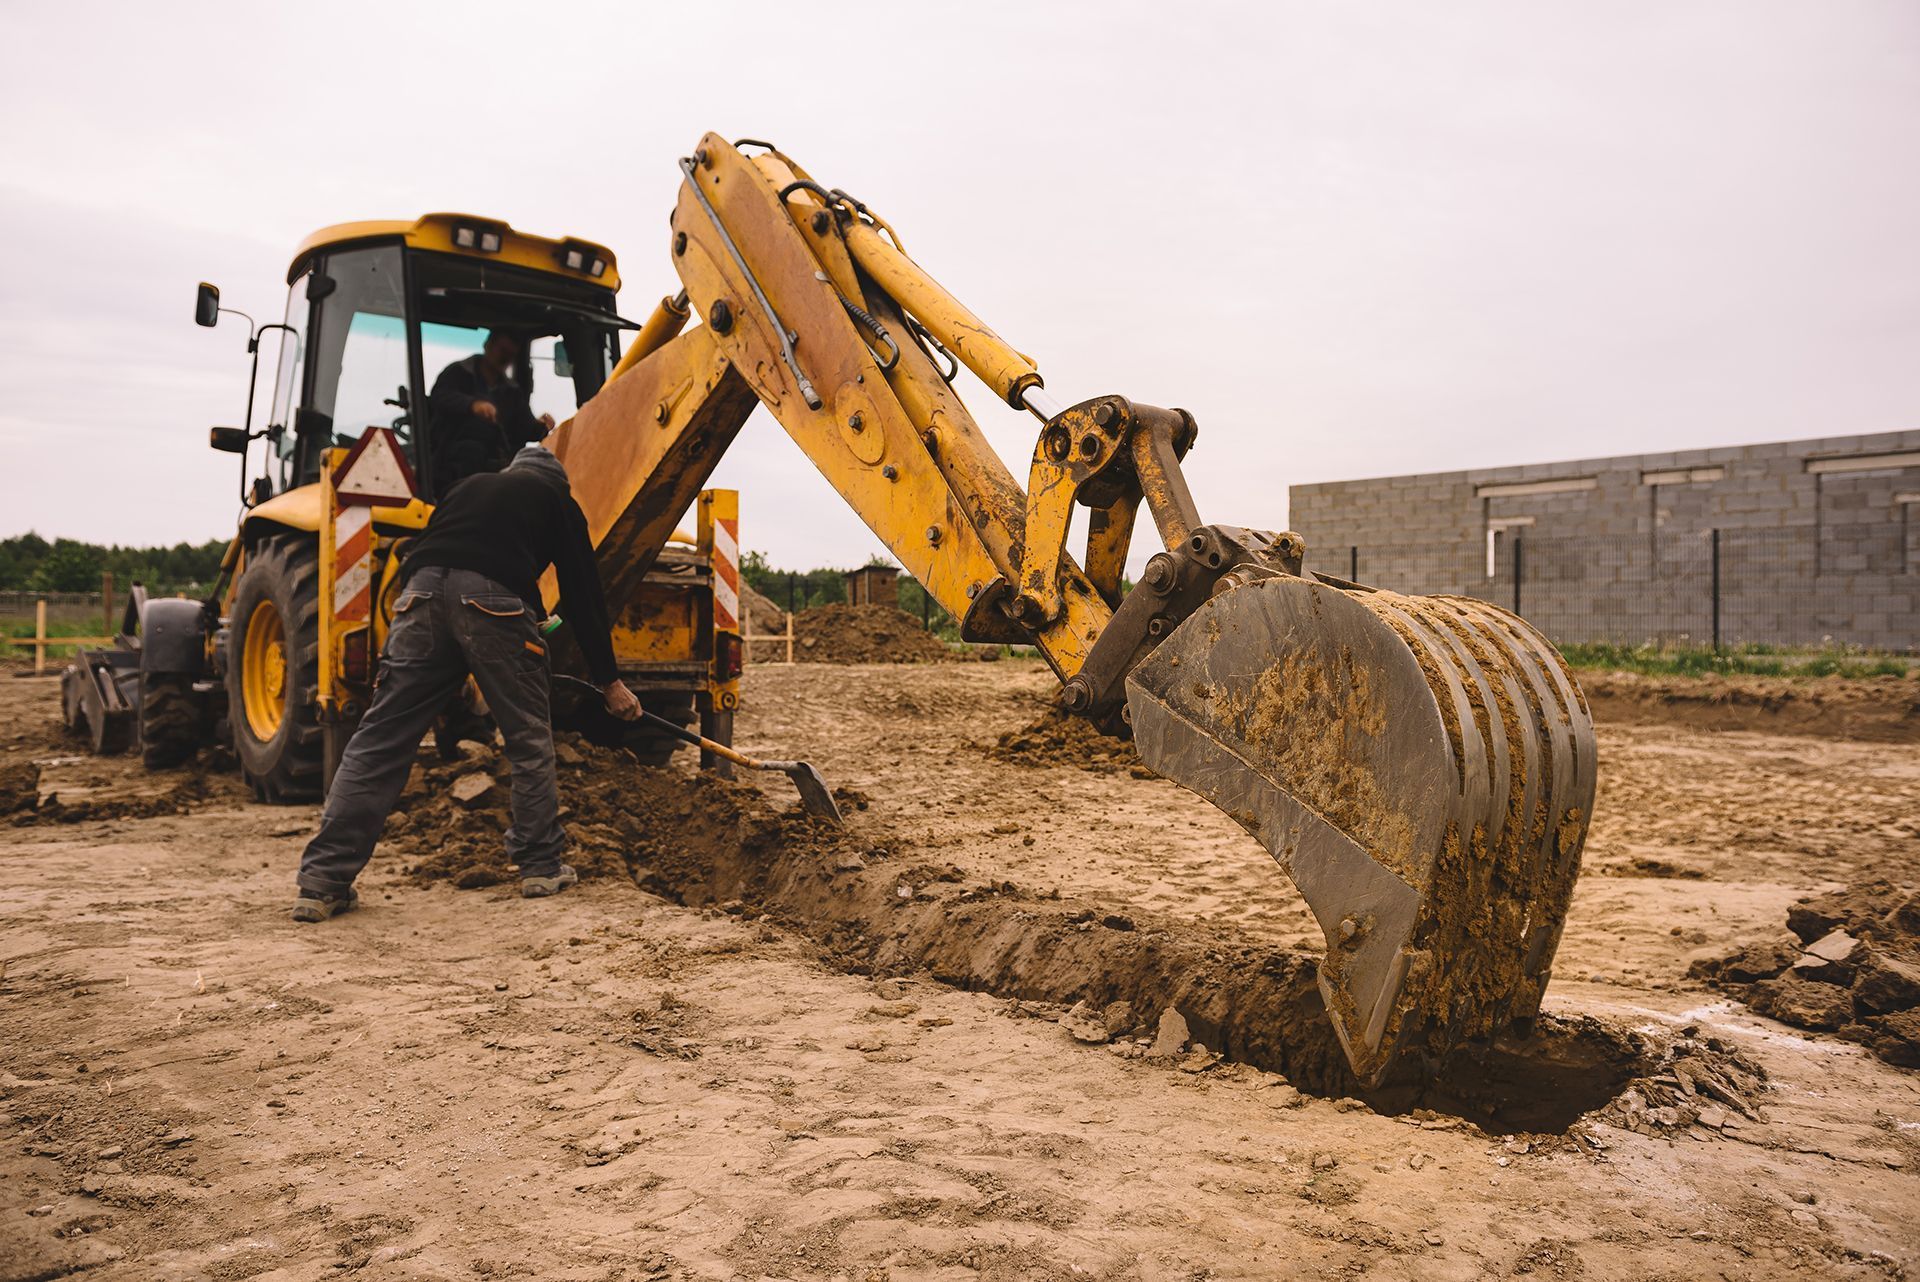 A man is digging a hole in the dirt next to a yellow excavator.